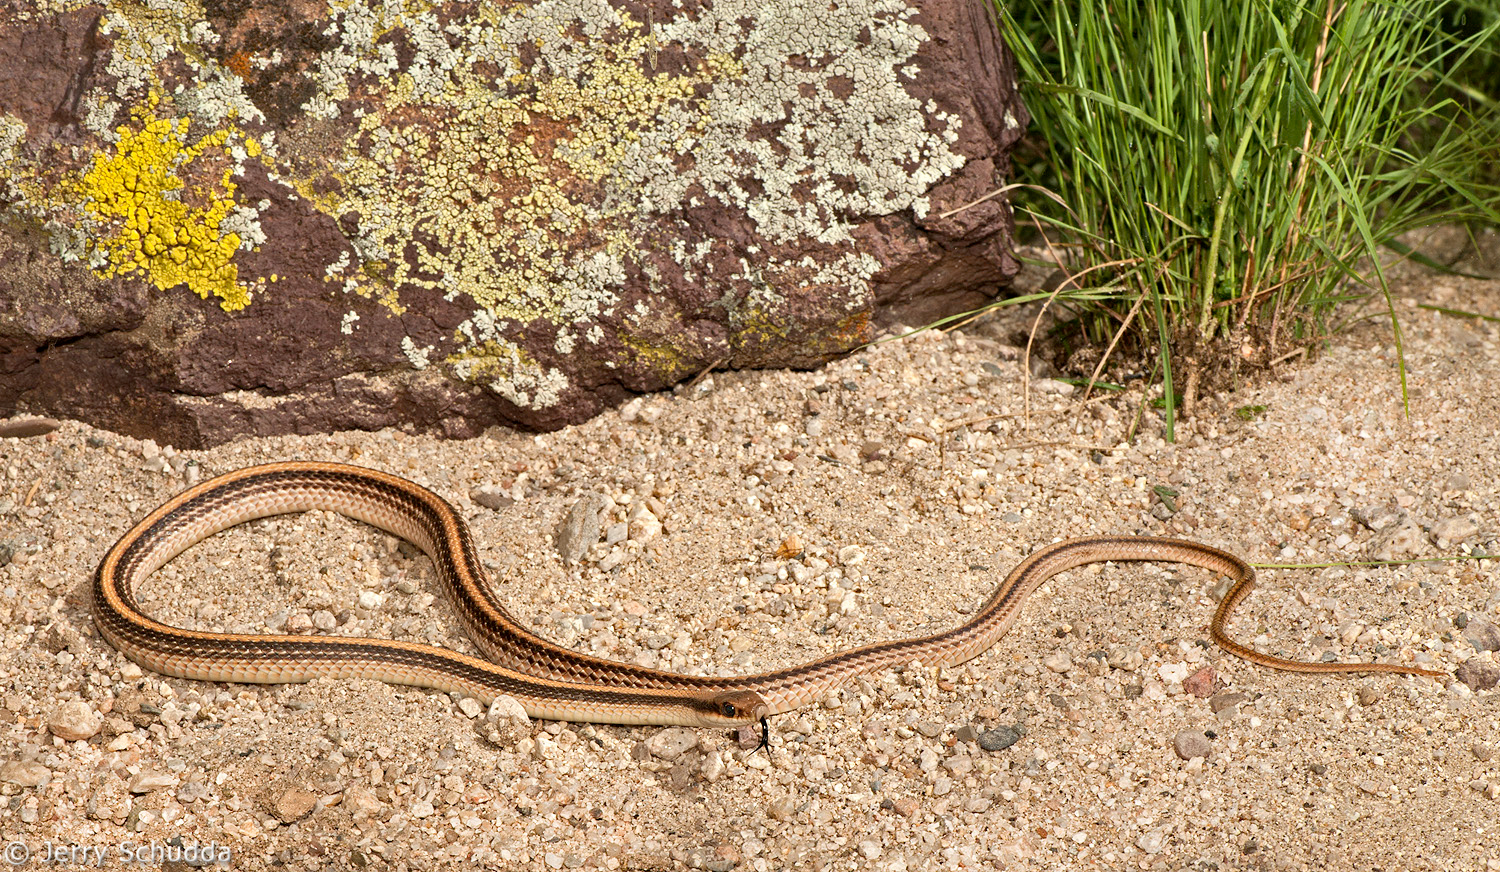 Western Patch-nosed Snake          